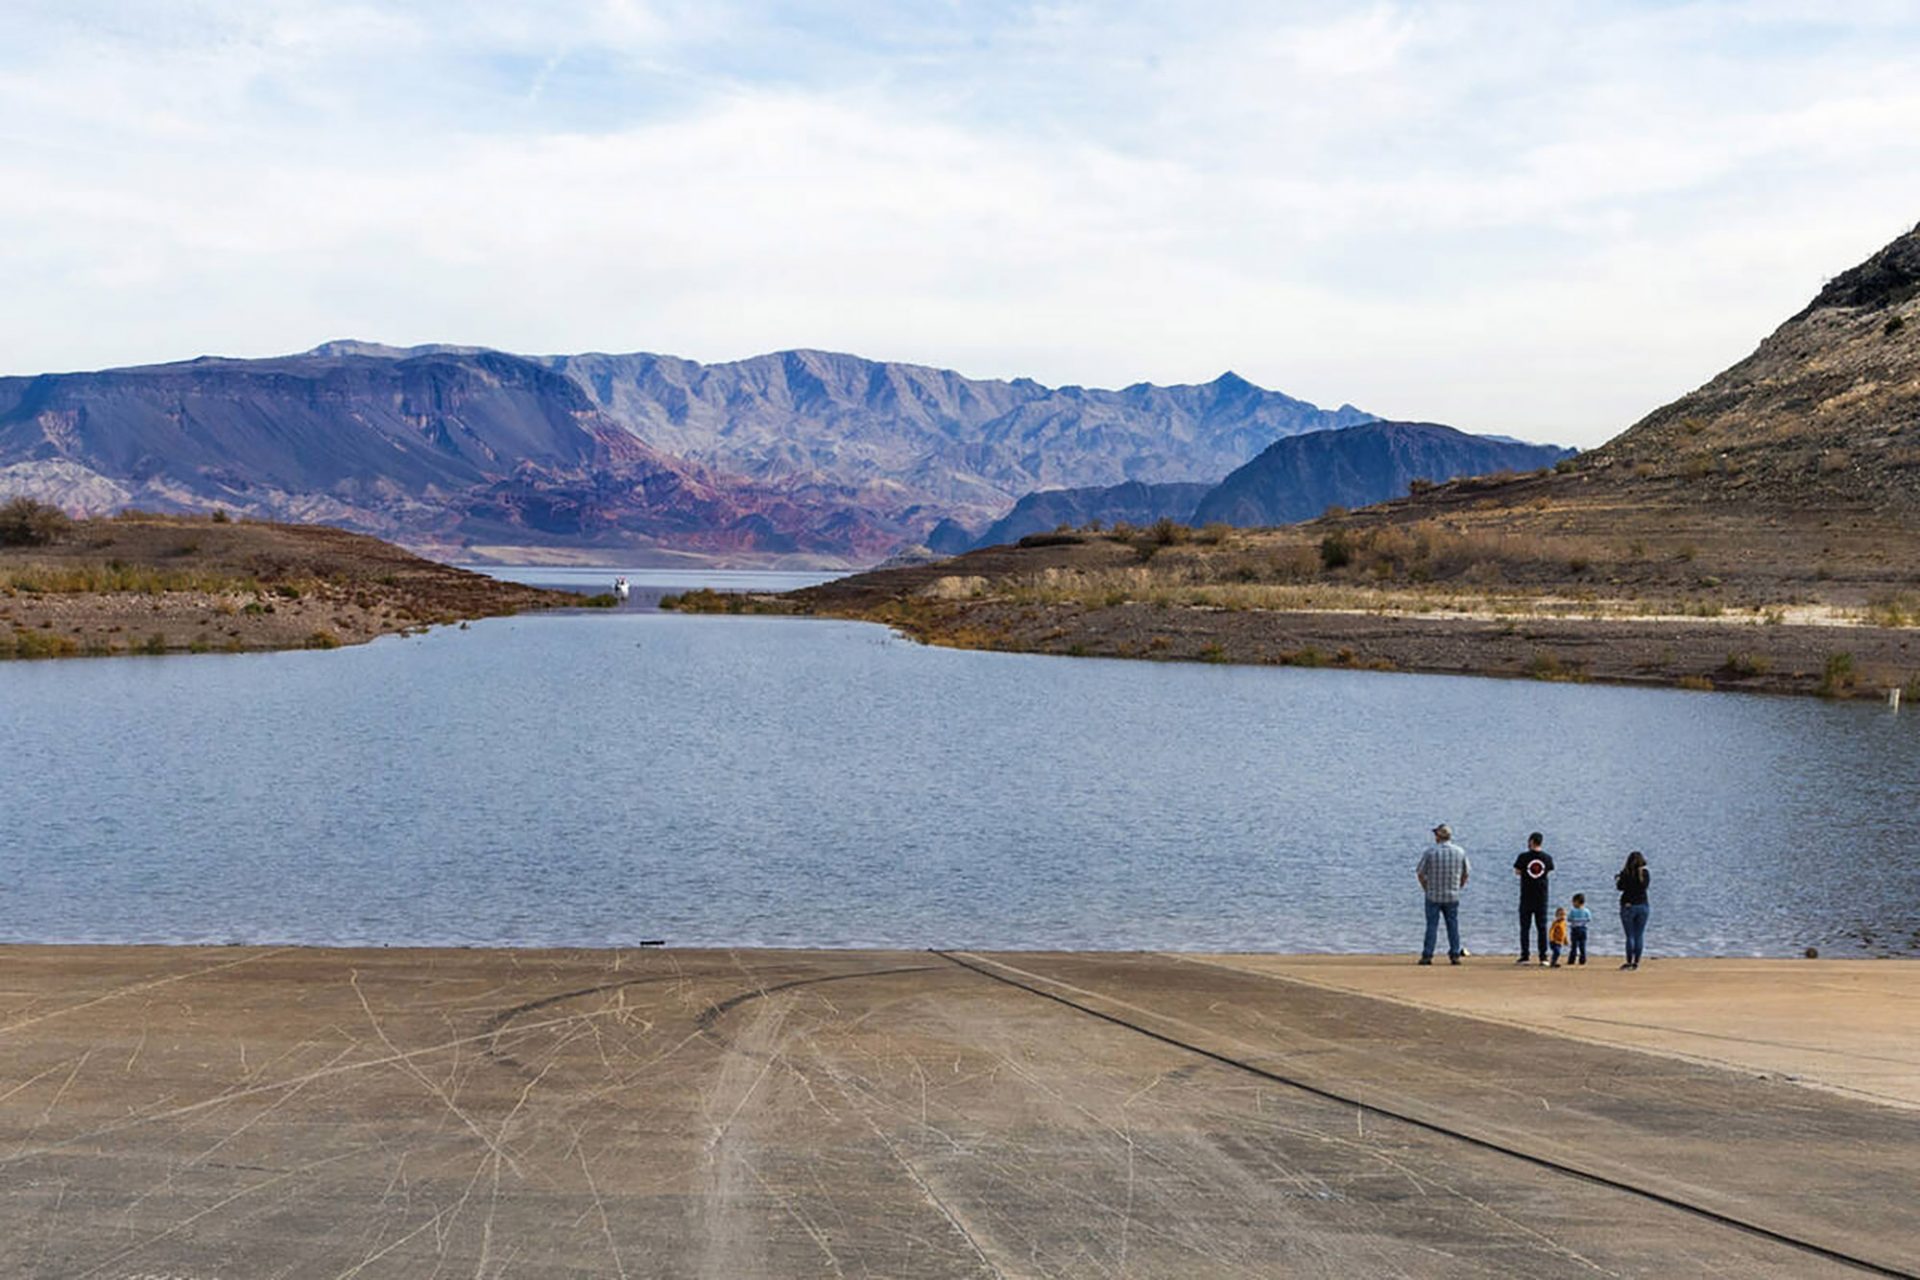 Remember when Lake Mead's low water levels revealed something disturbing?